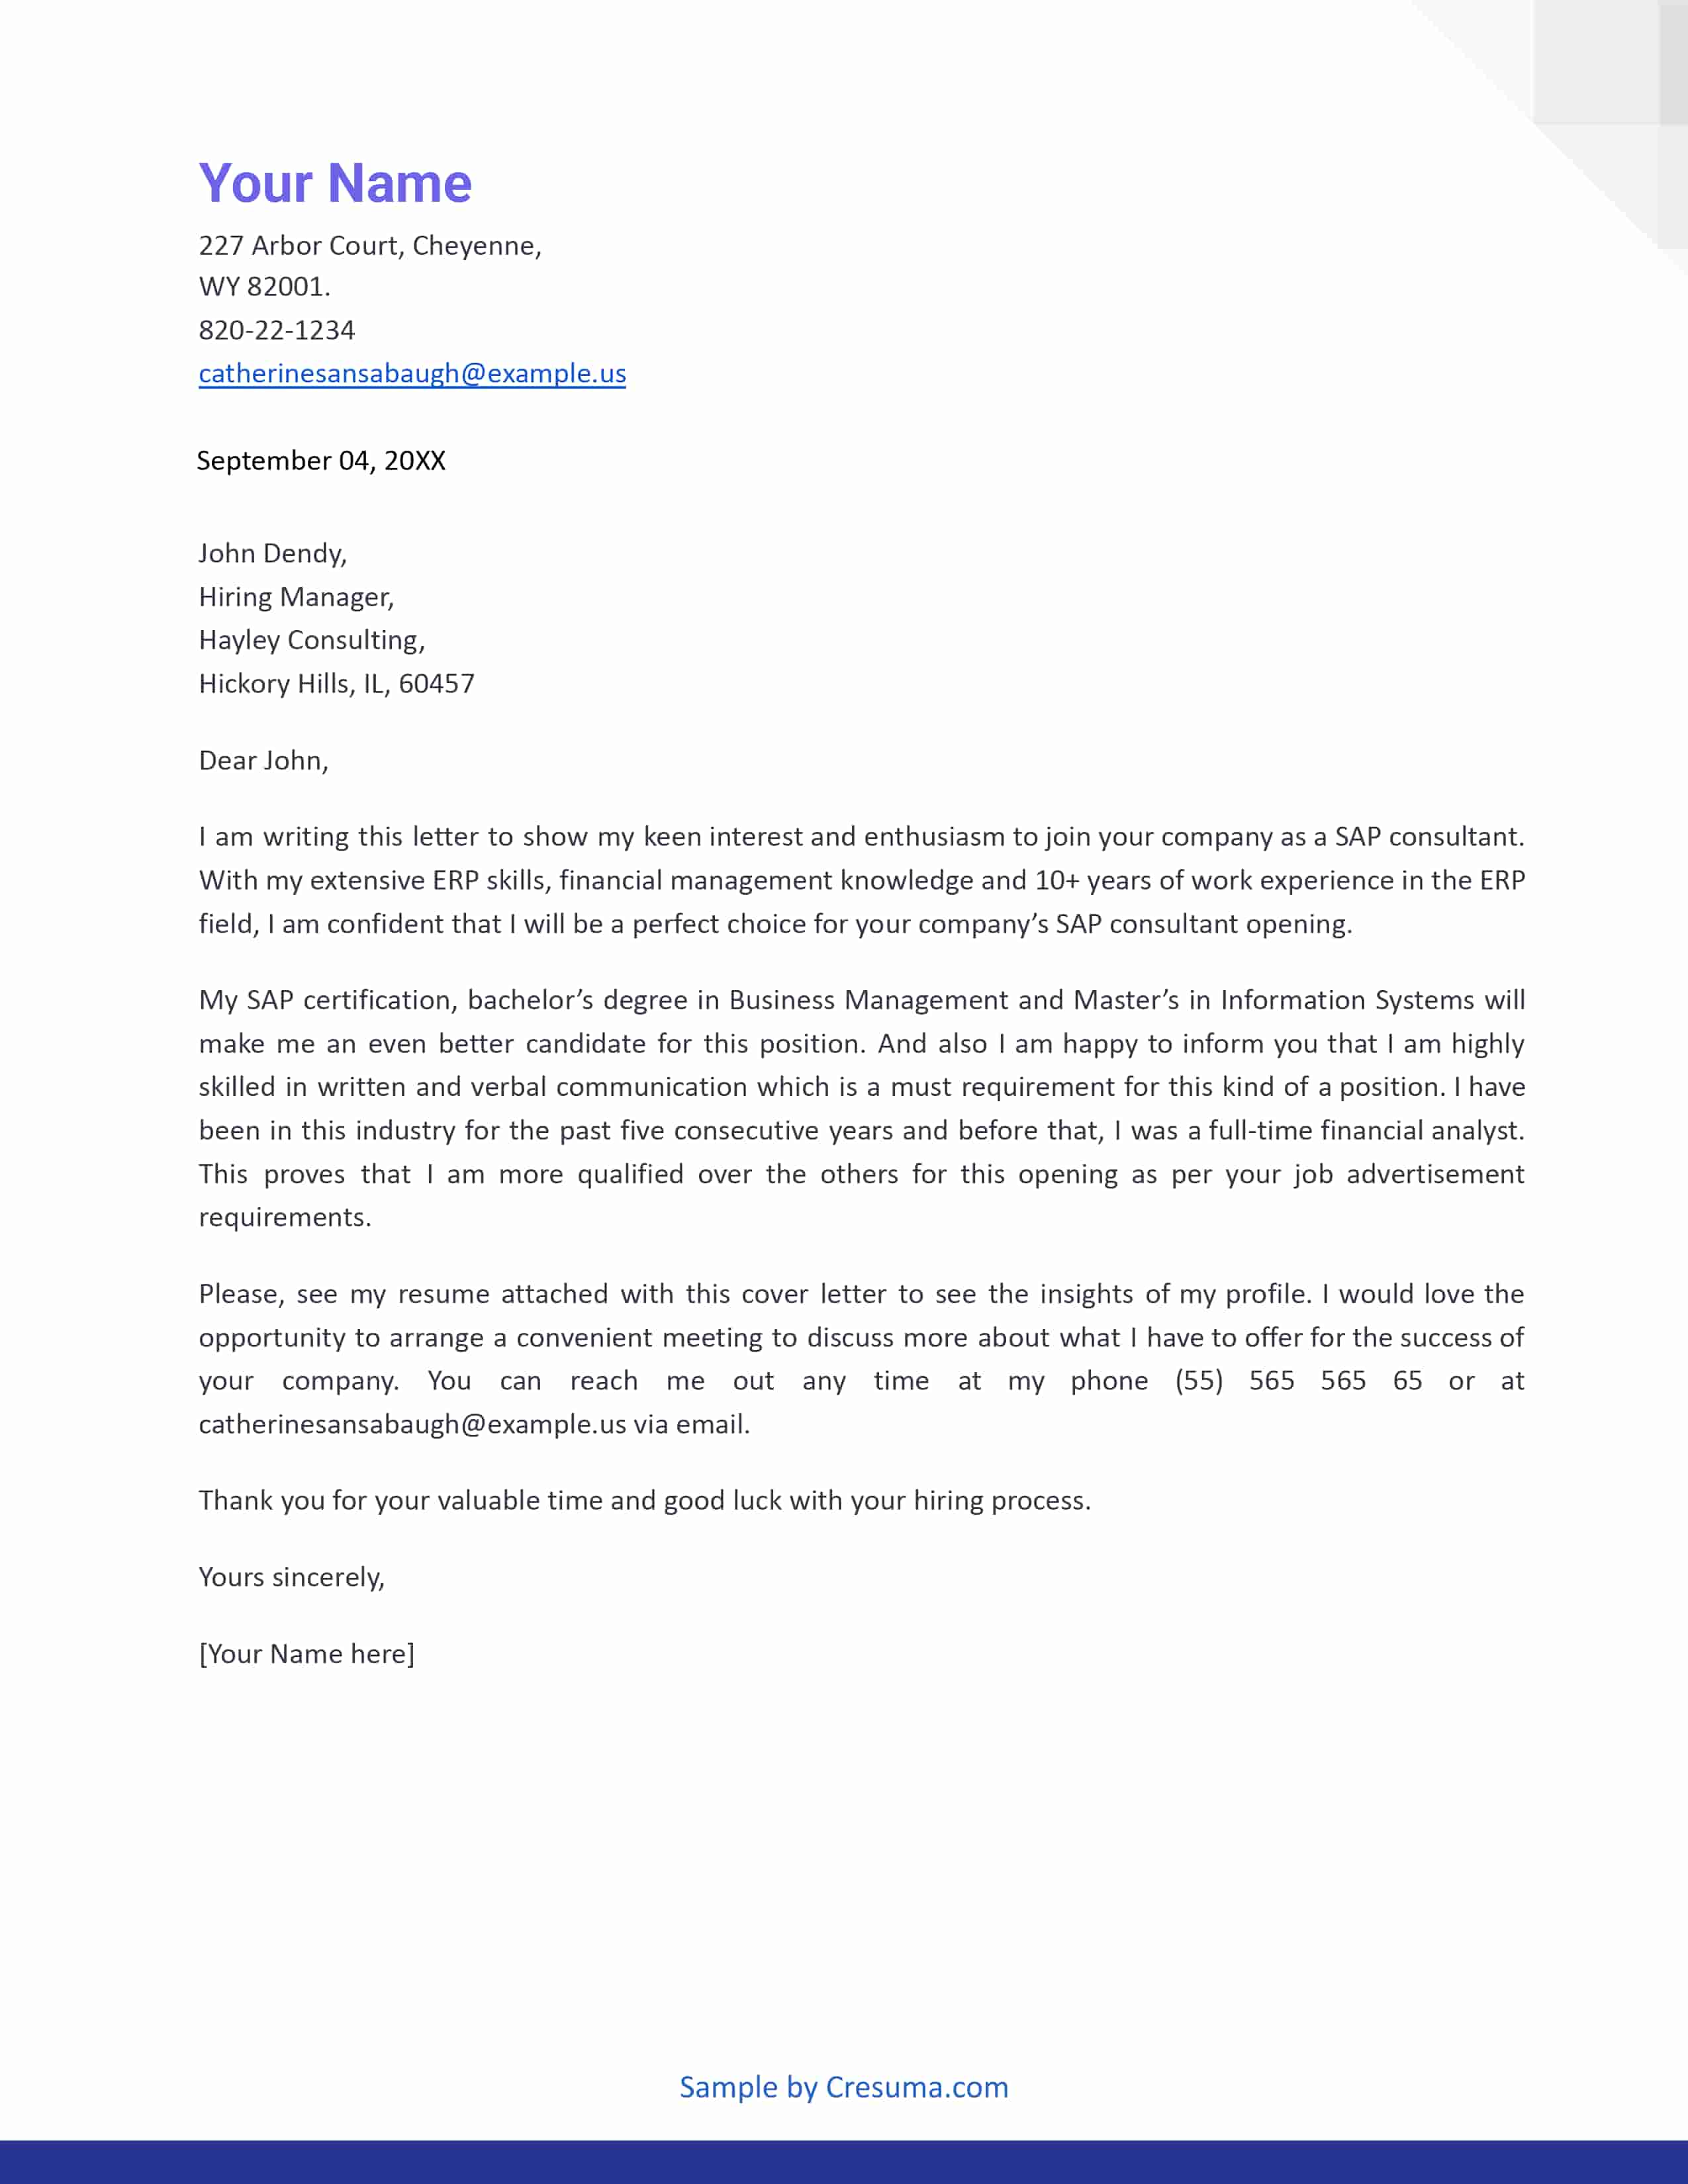 SAP Consultant cover letter example template 3